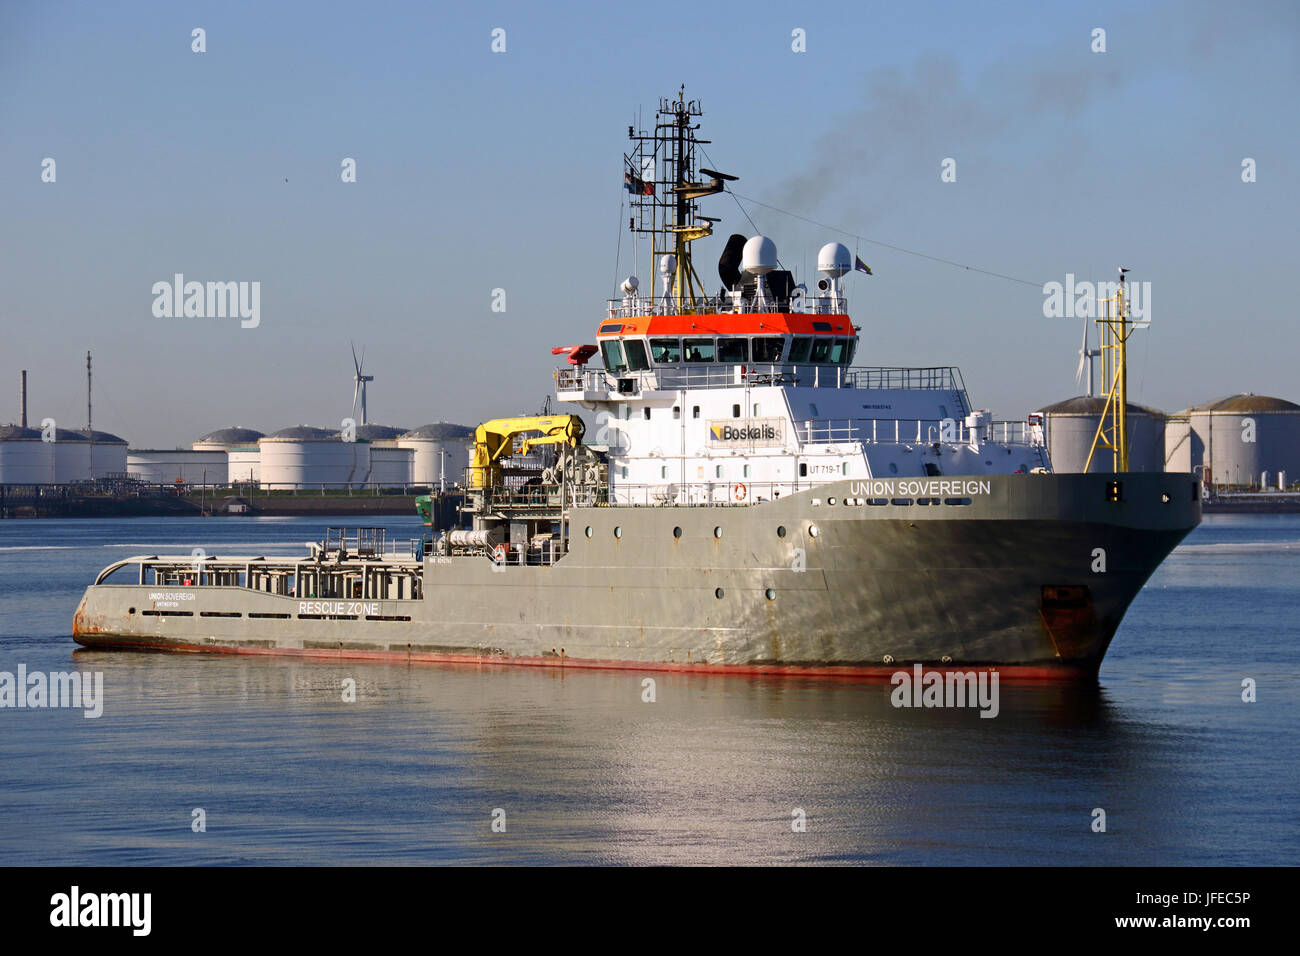 The tugboat Union Sovereign is waiting in the port of Rotterdam to haul the Thiaf out of the port. Stock Photo